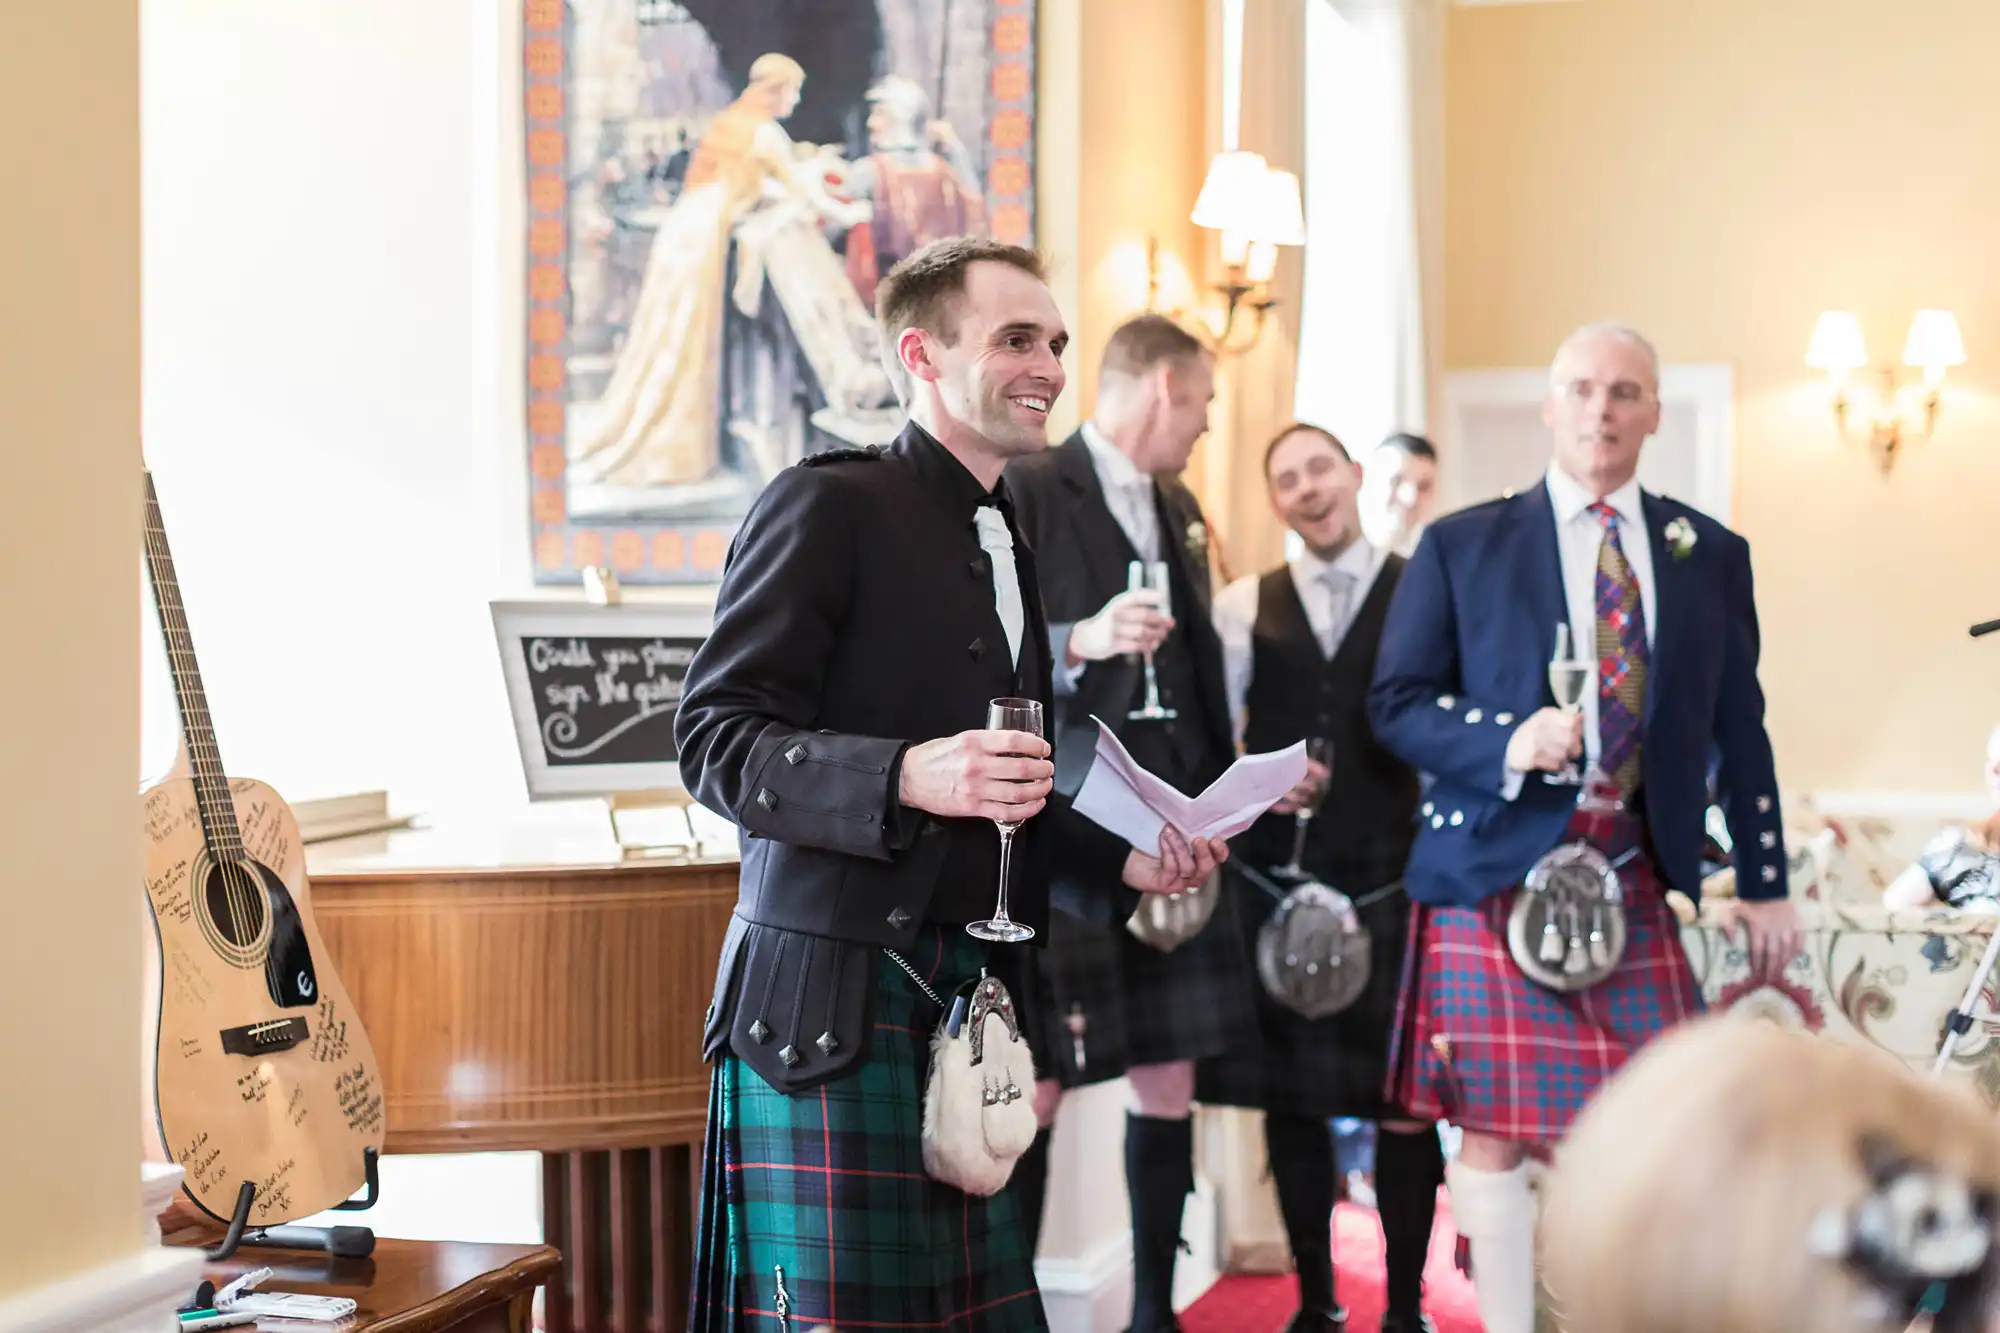 Man in kilt holding a speech and a glass of wine, smiling at a wedding reception with other guests in kilts around him.